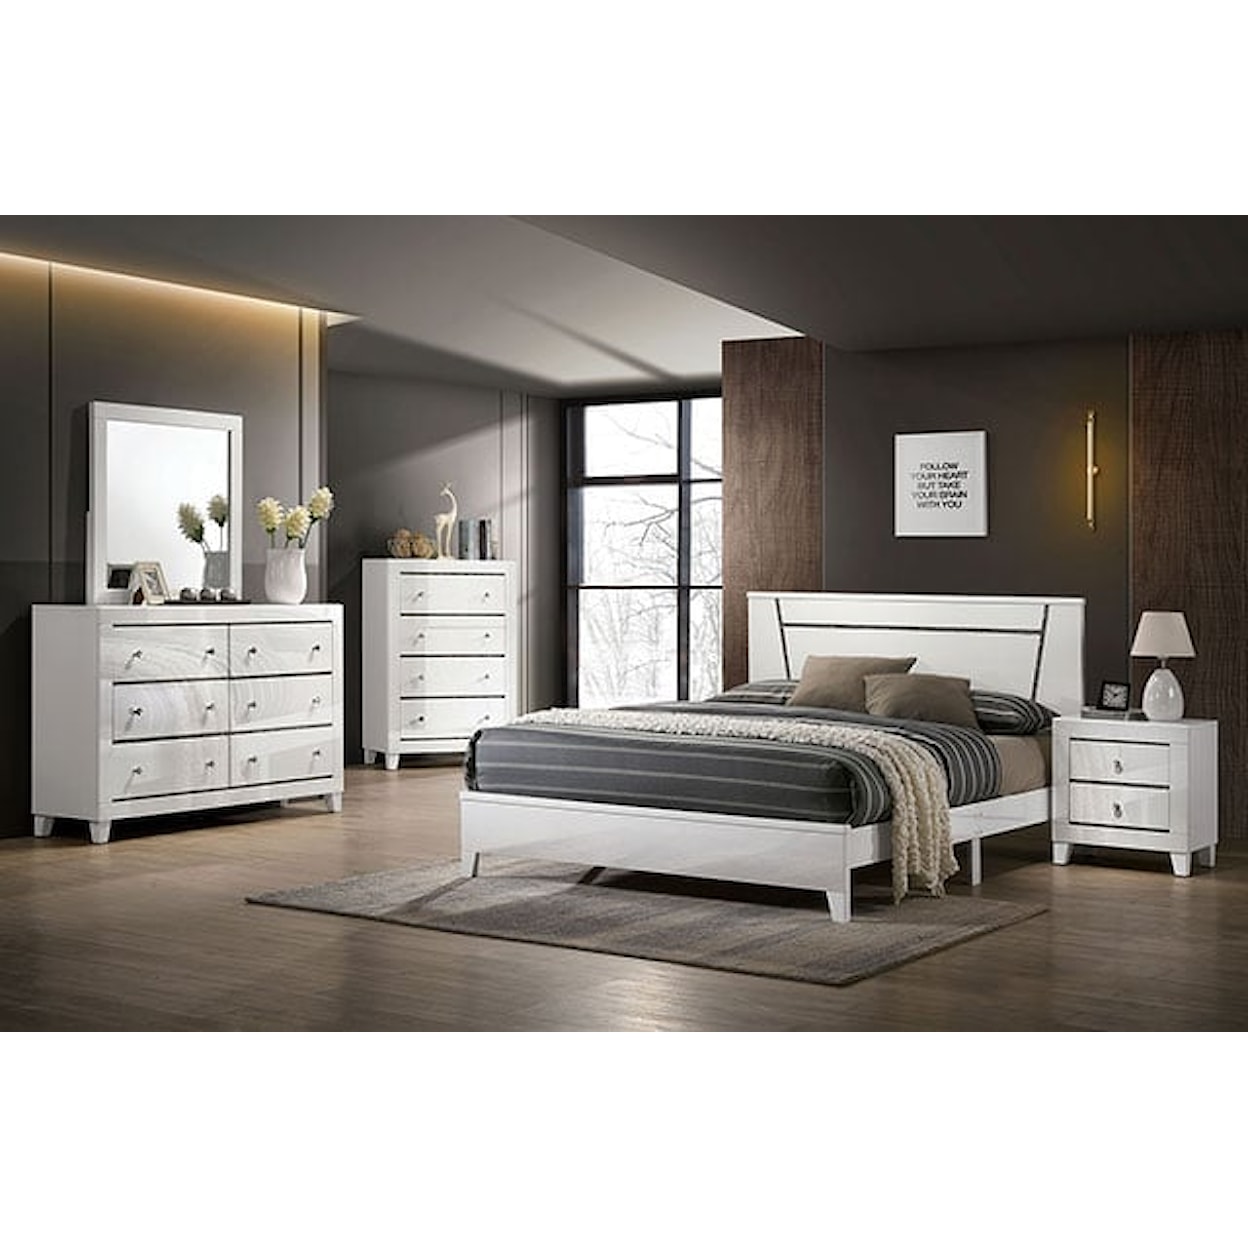 Furniture of America Magdeburg Queen Bedroom Group